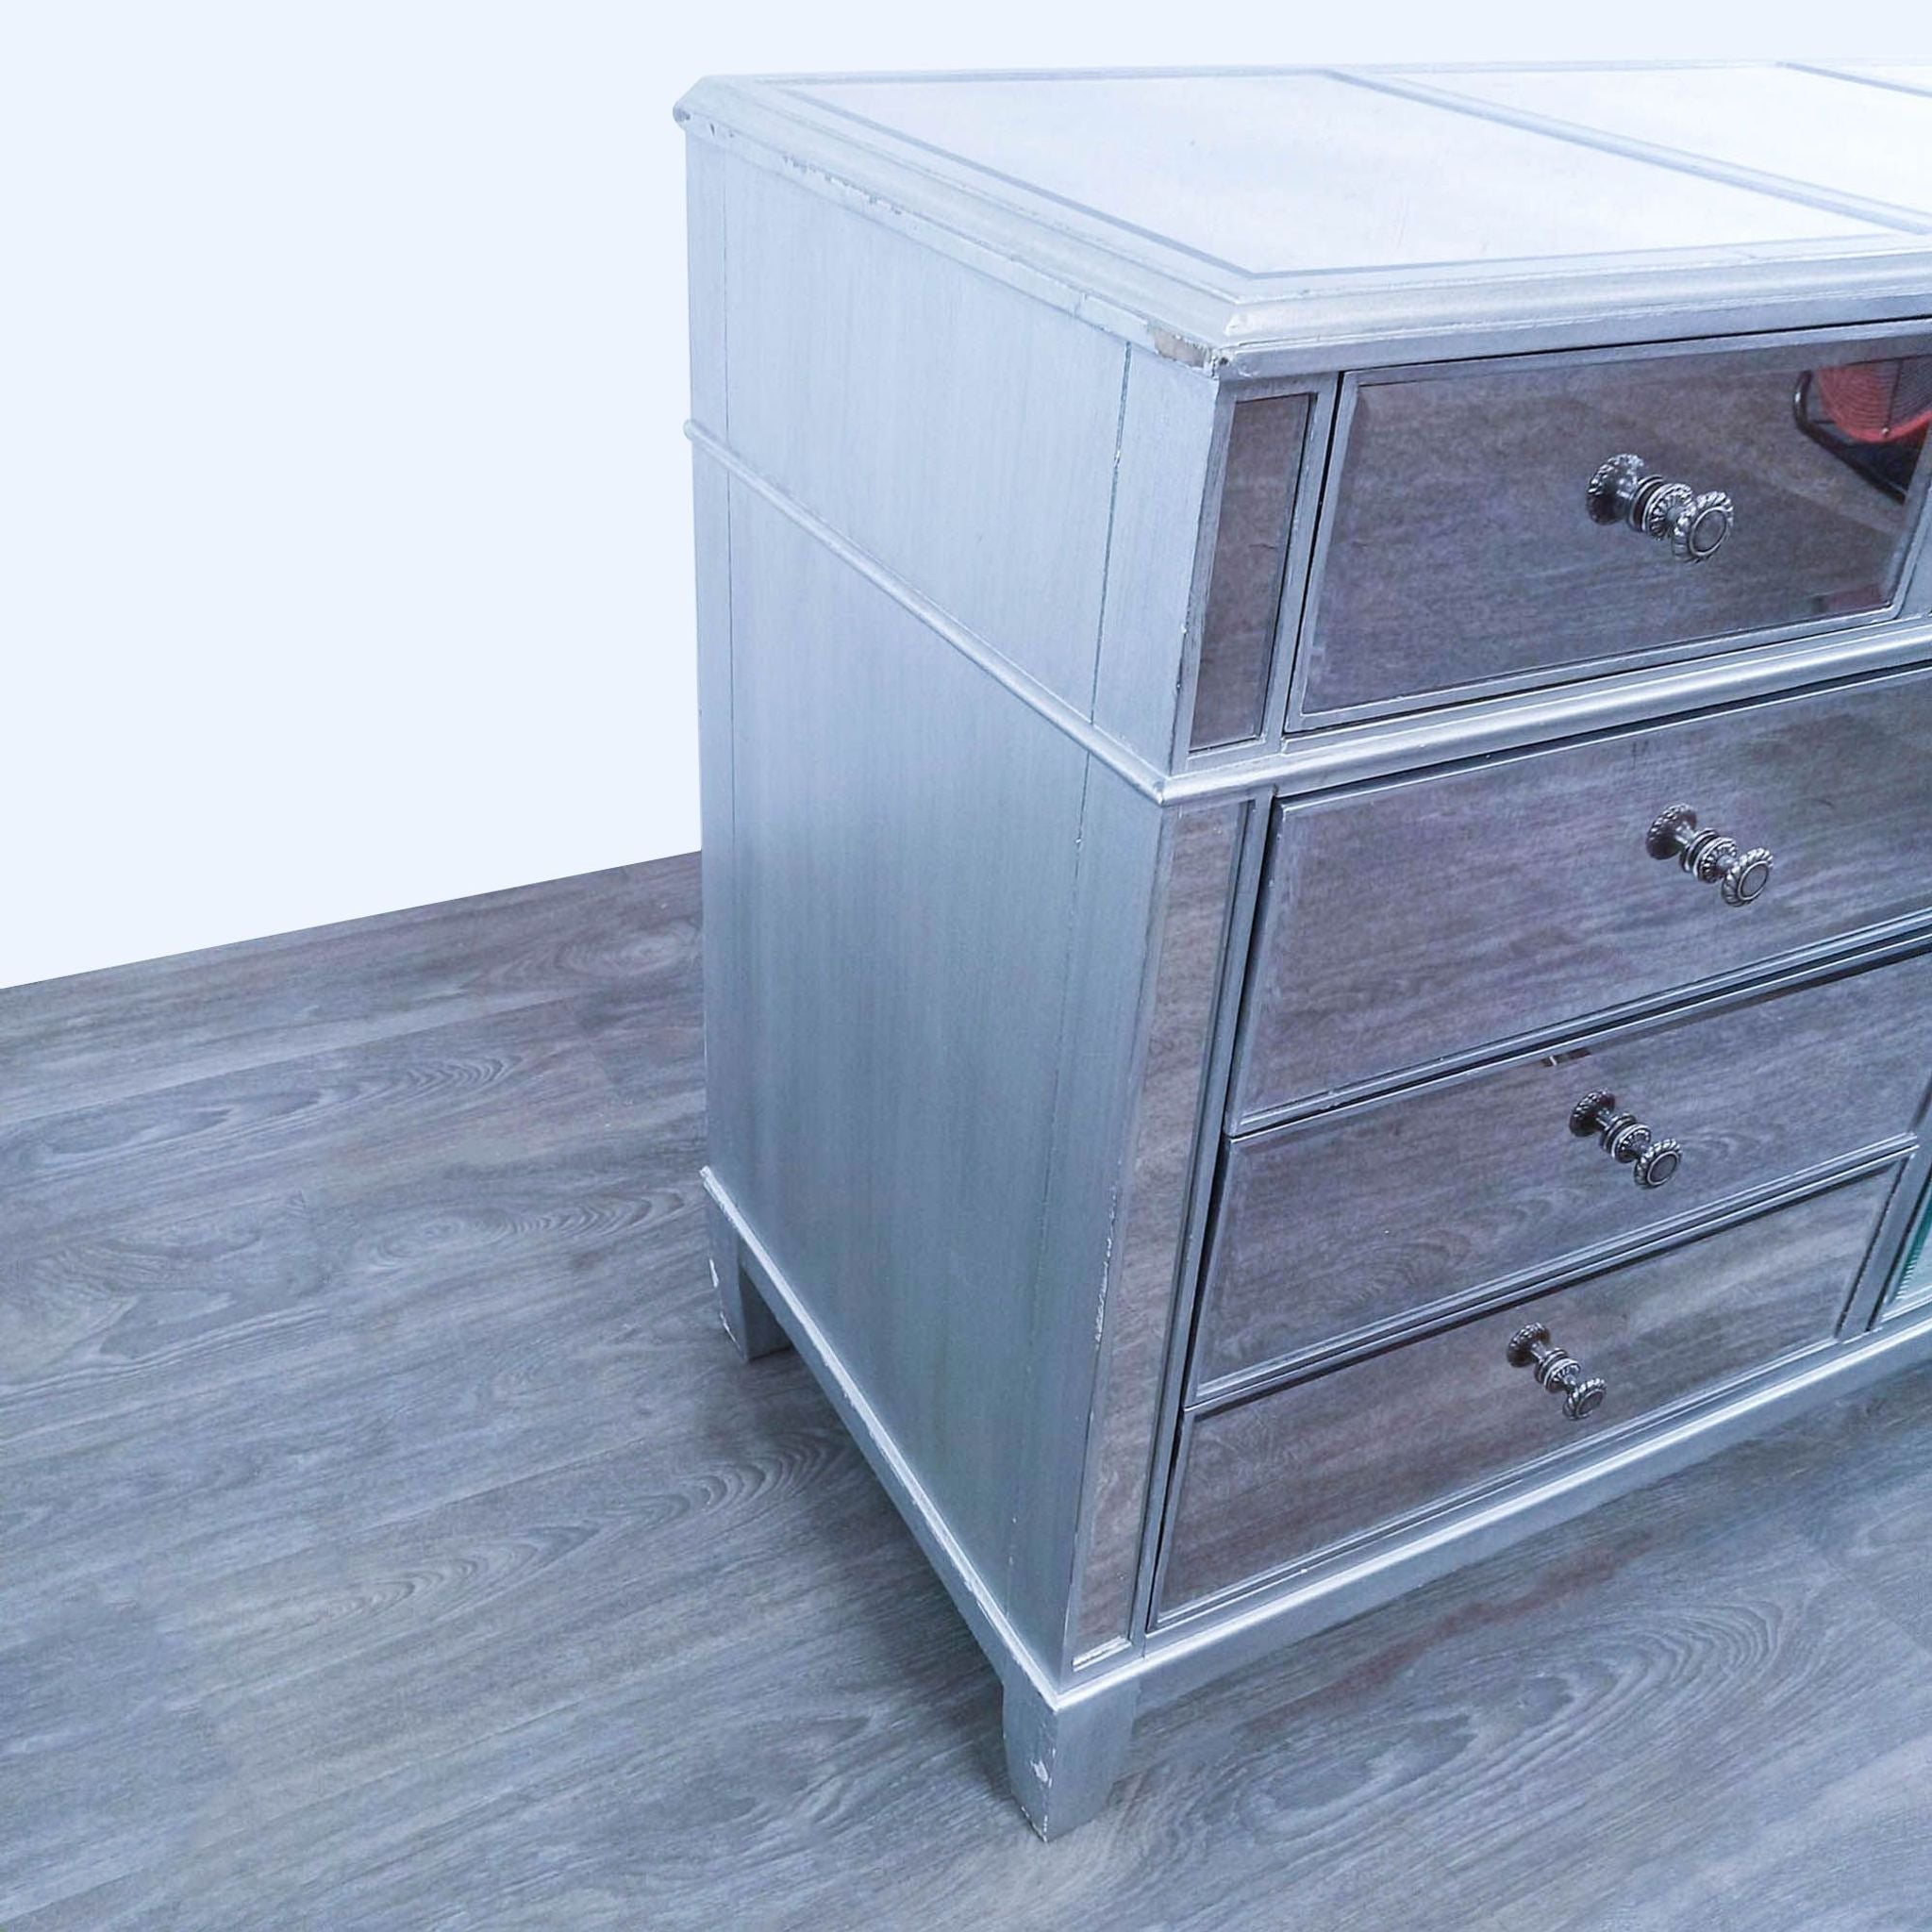 Pier 1 Hayworth mirrored dresser with silver finish and nine drawers on a wooden floor.